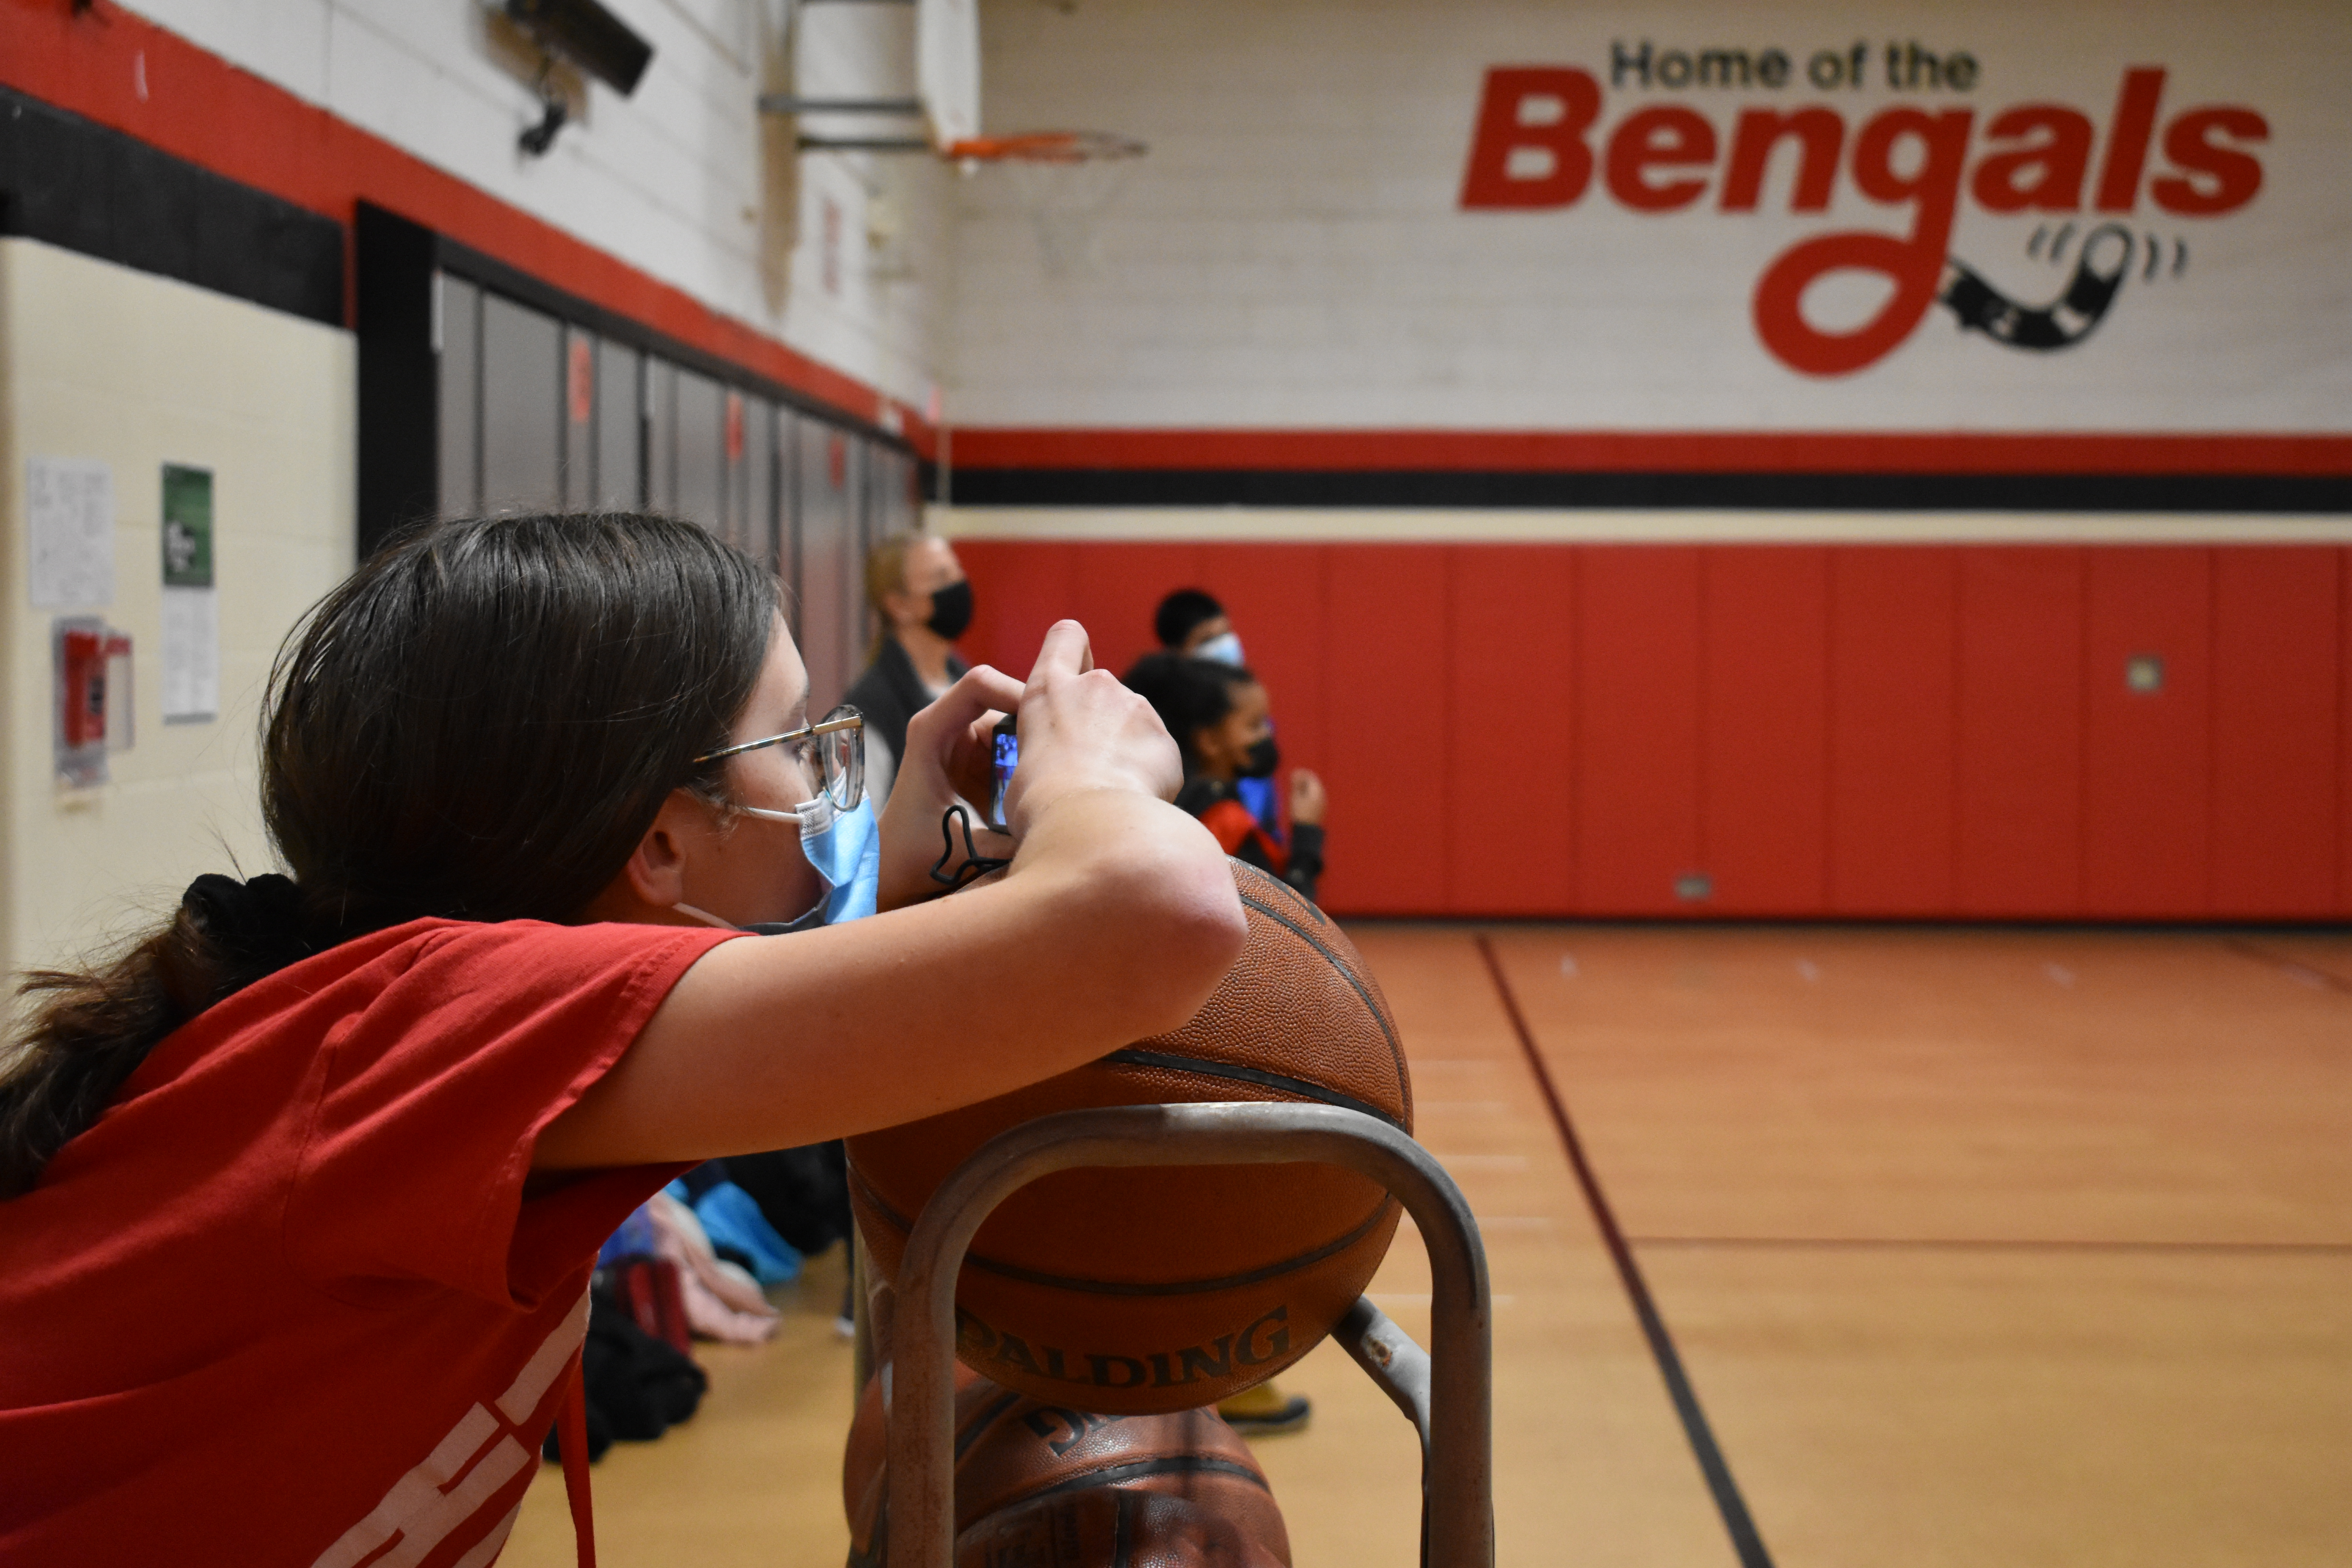 yearbook club member takes a picture of intramurals in the small gym